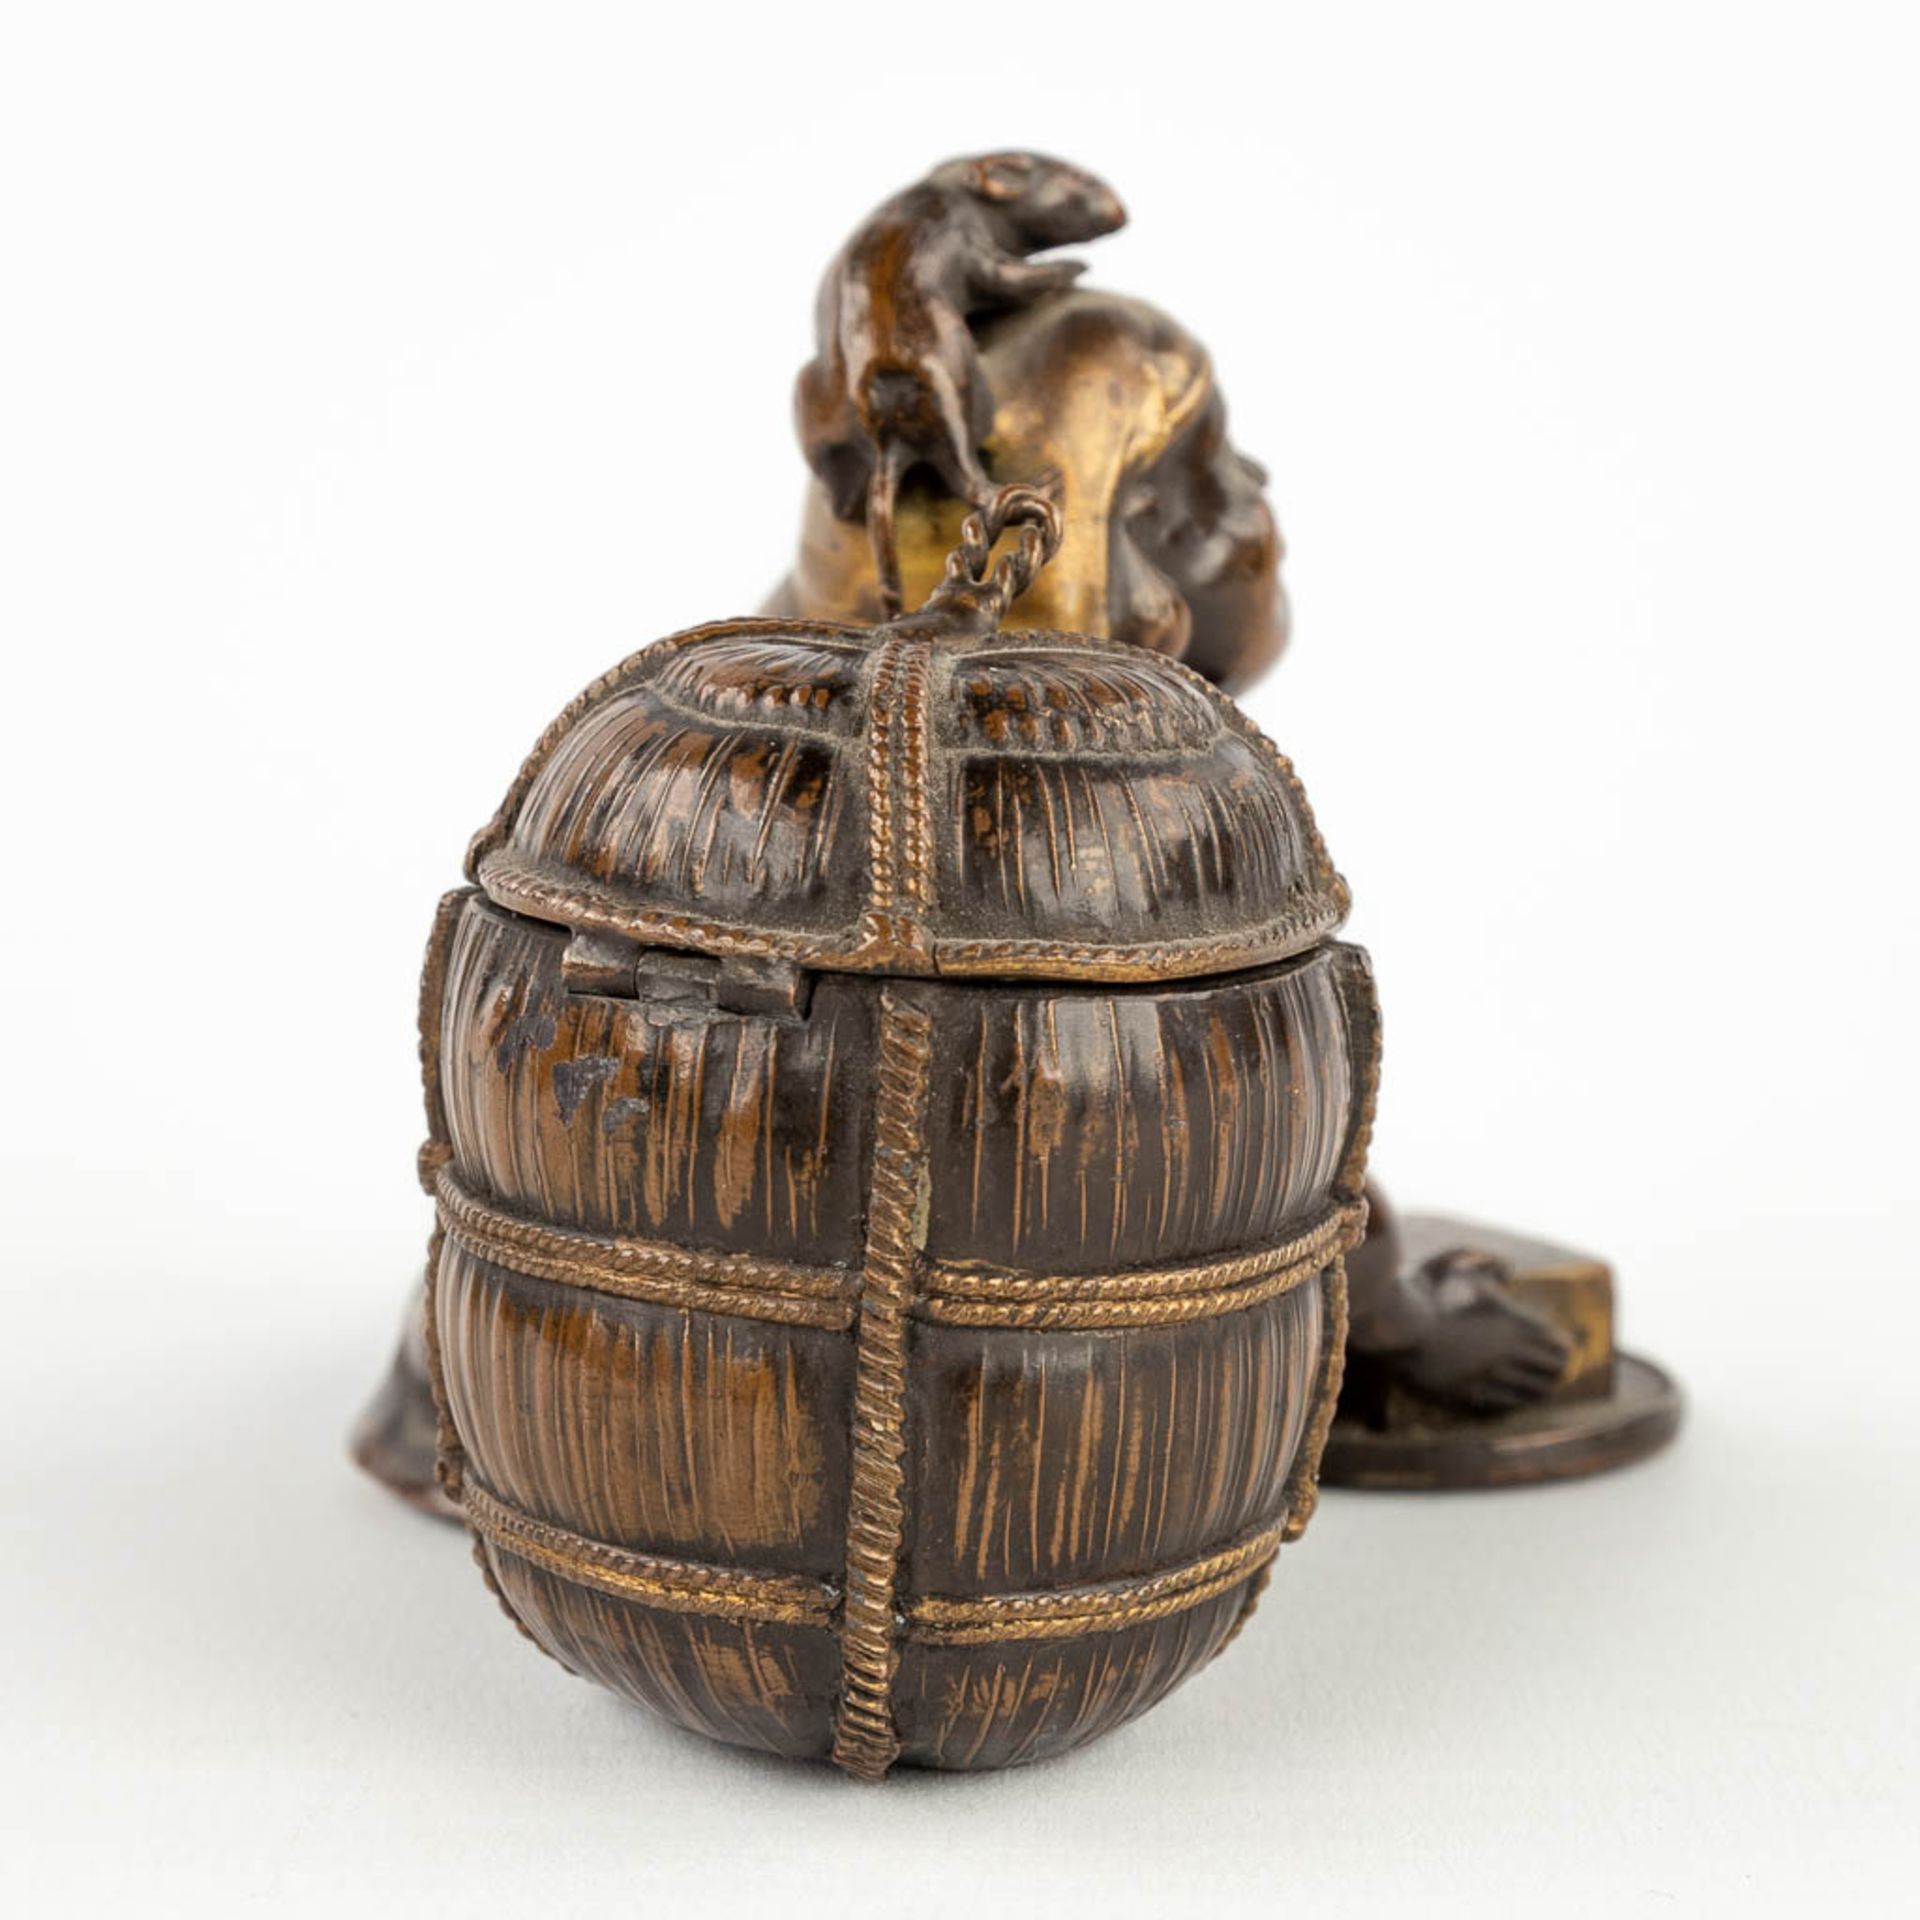 A figurative ink pot, bronze, Oriental figurine with a mouse. 19th century. (L: 8 x W: 10 x H: 8 cm) - Image 5 of 14